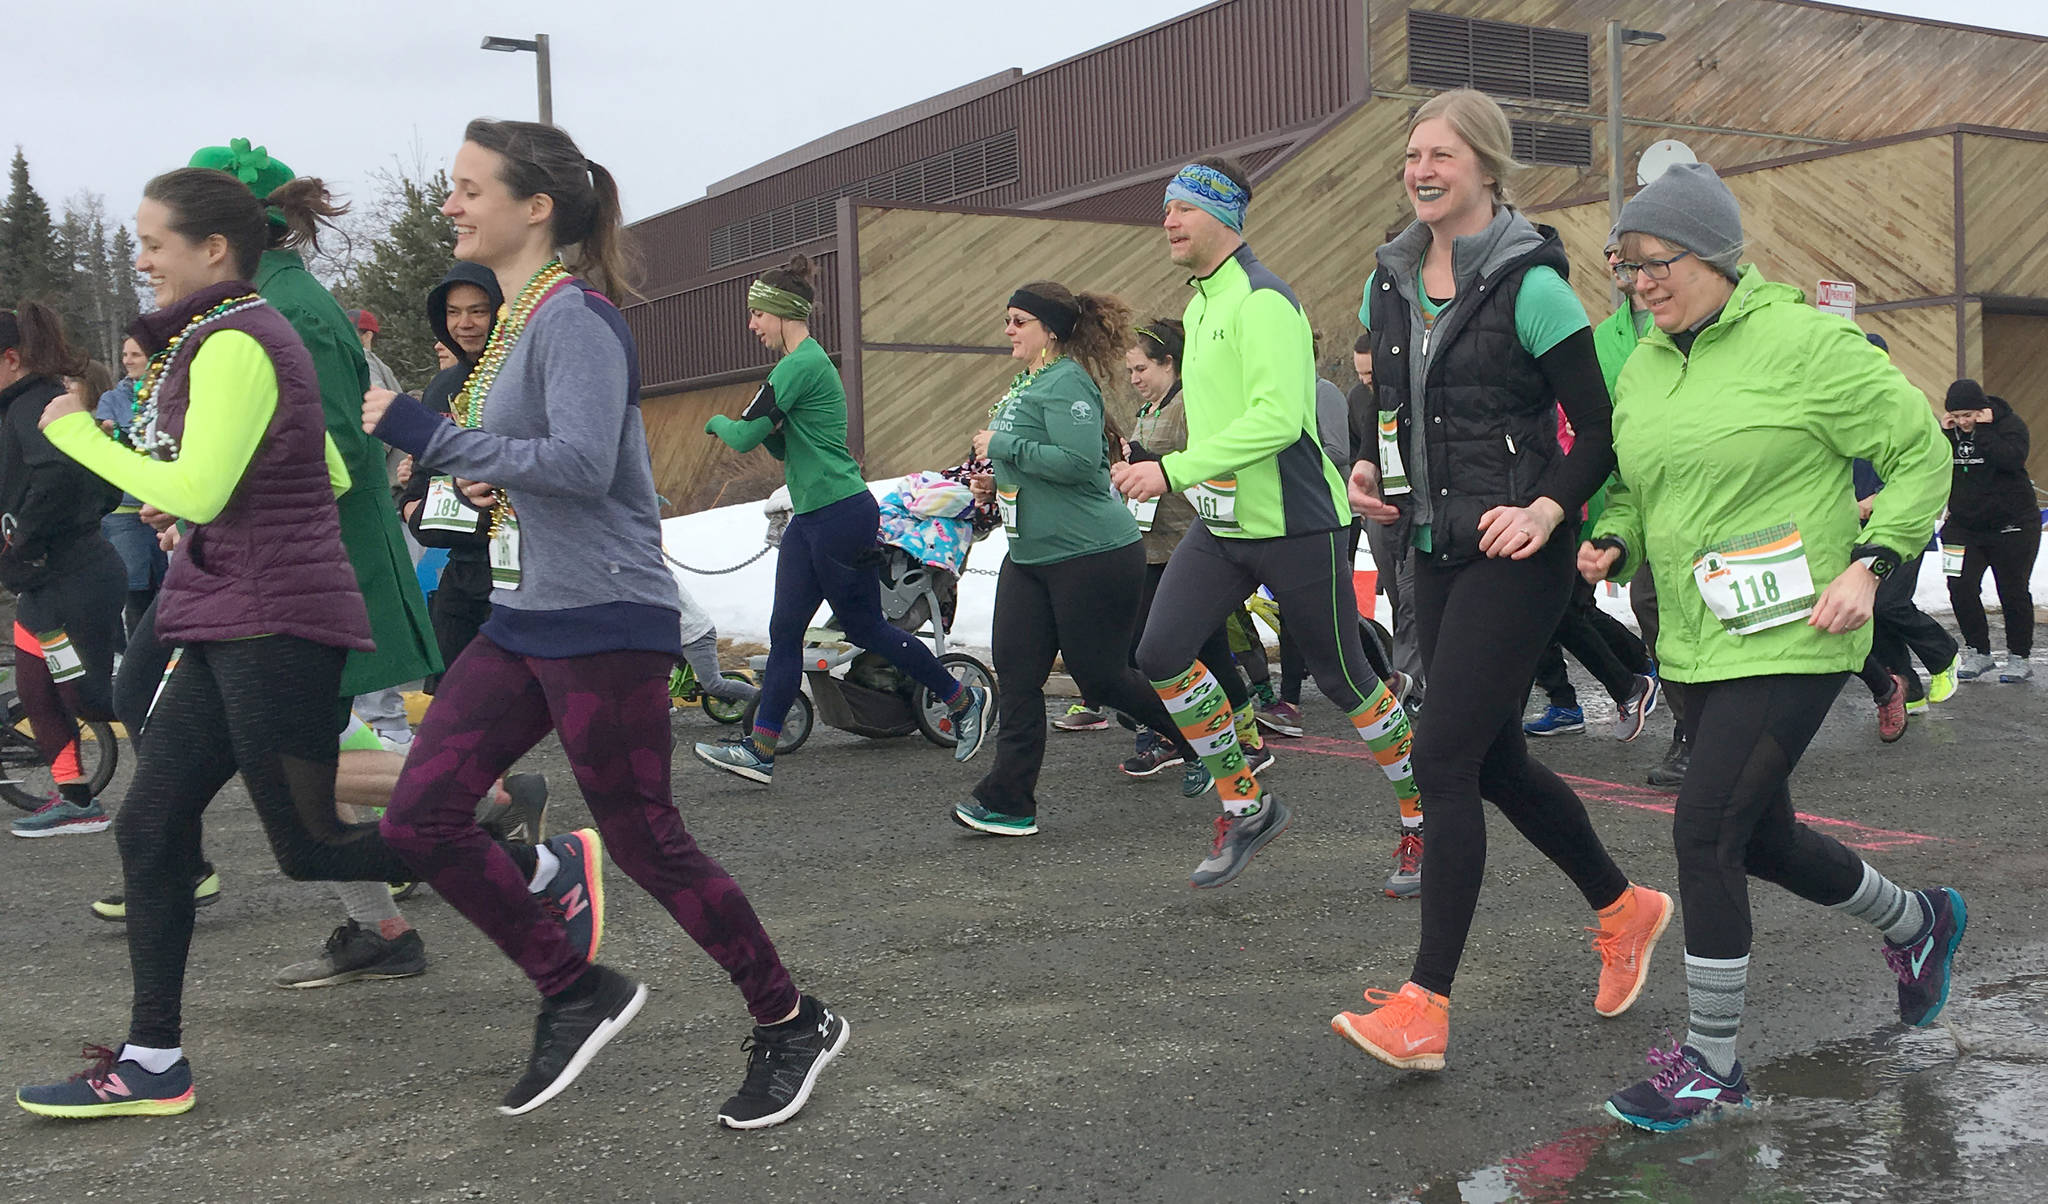 Runners take off at the start of the Shamrock Shuffle on Sunday, March 17, 2019, at the Soldotna Regional Sports Complex. (Photo by Jeff Helminiak/Peninsula Clarion)